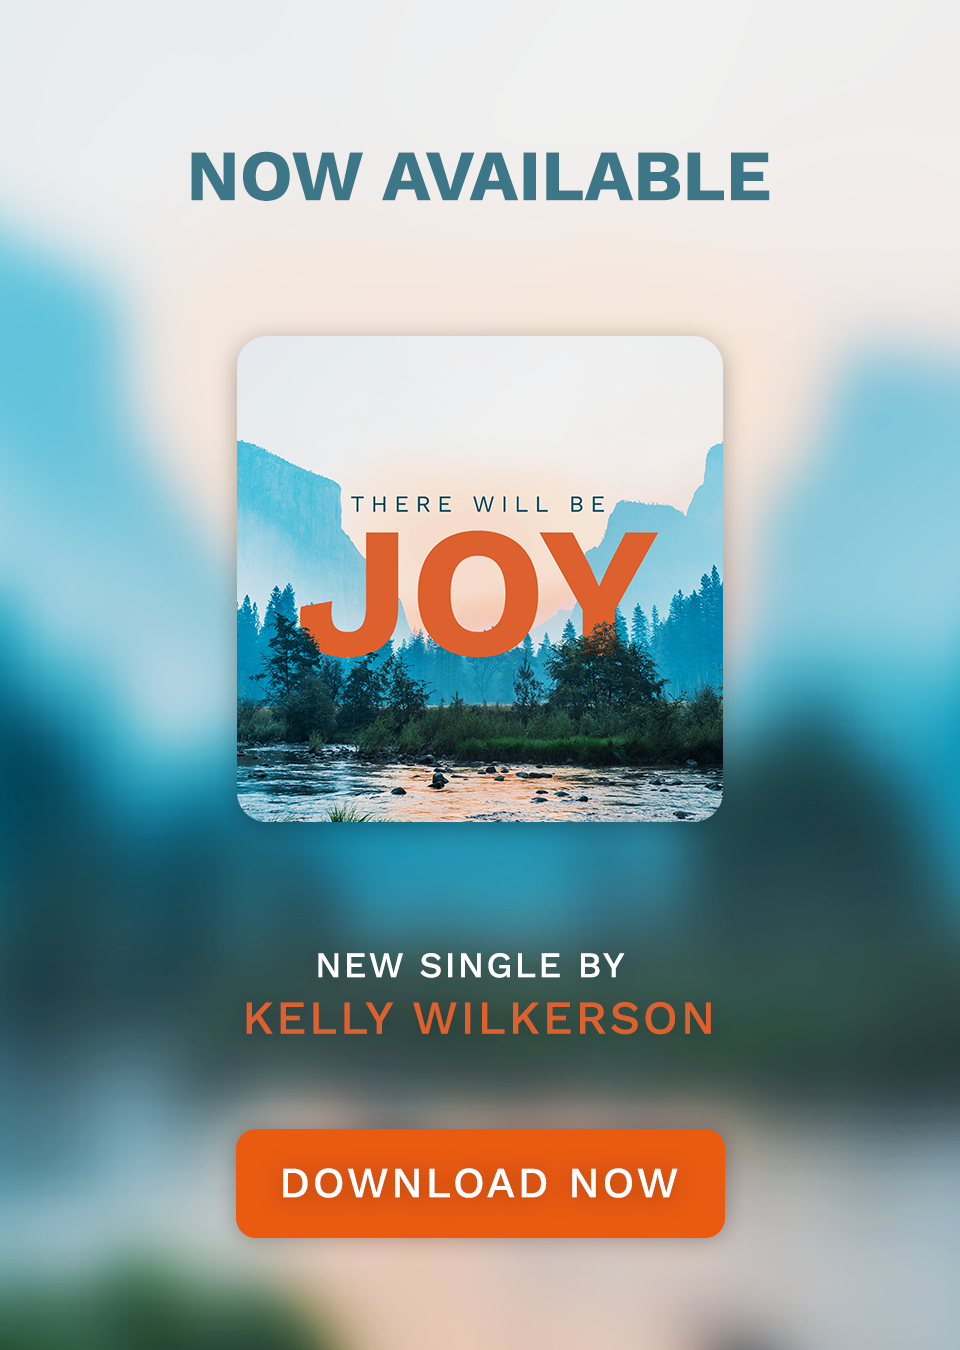 There Will Be Joy - New Song by Kelly Wilkerson